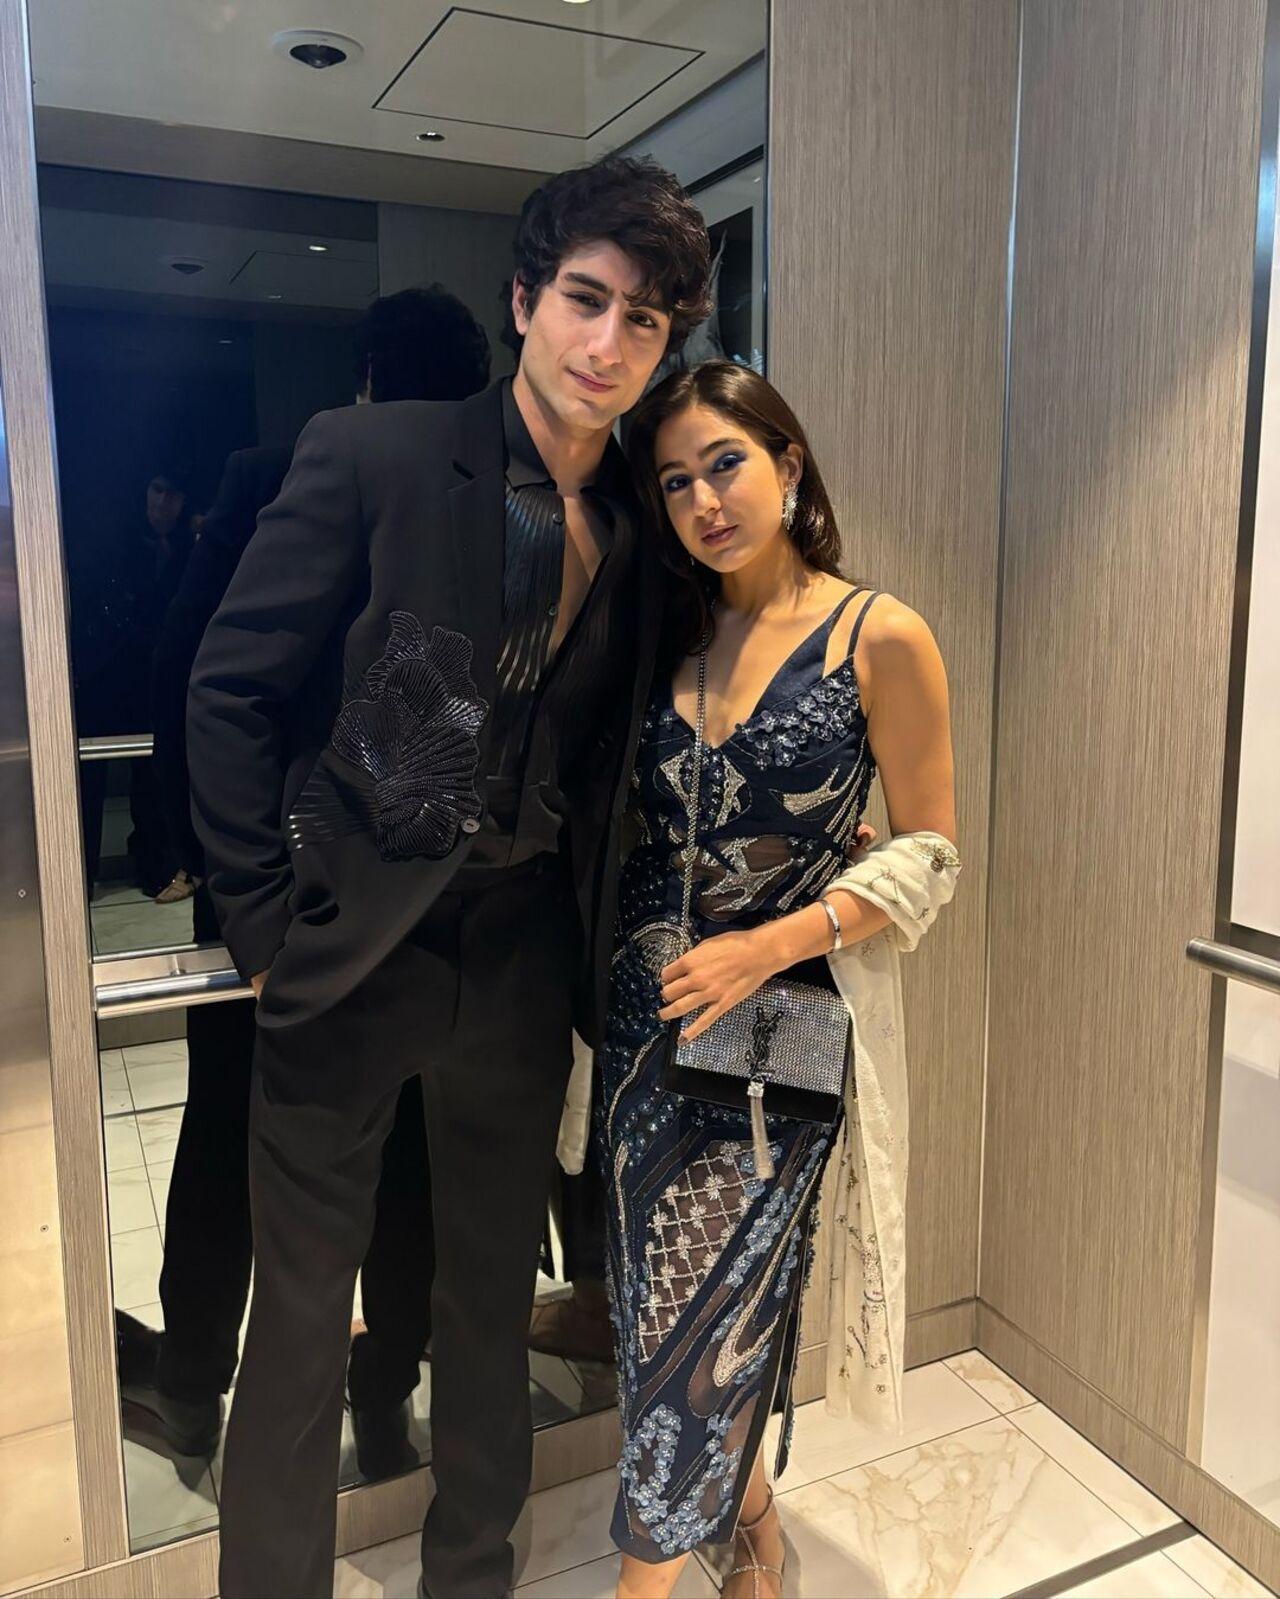 Ibrahim and Sara make for a stylish sibling duo during a party night on the cruise